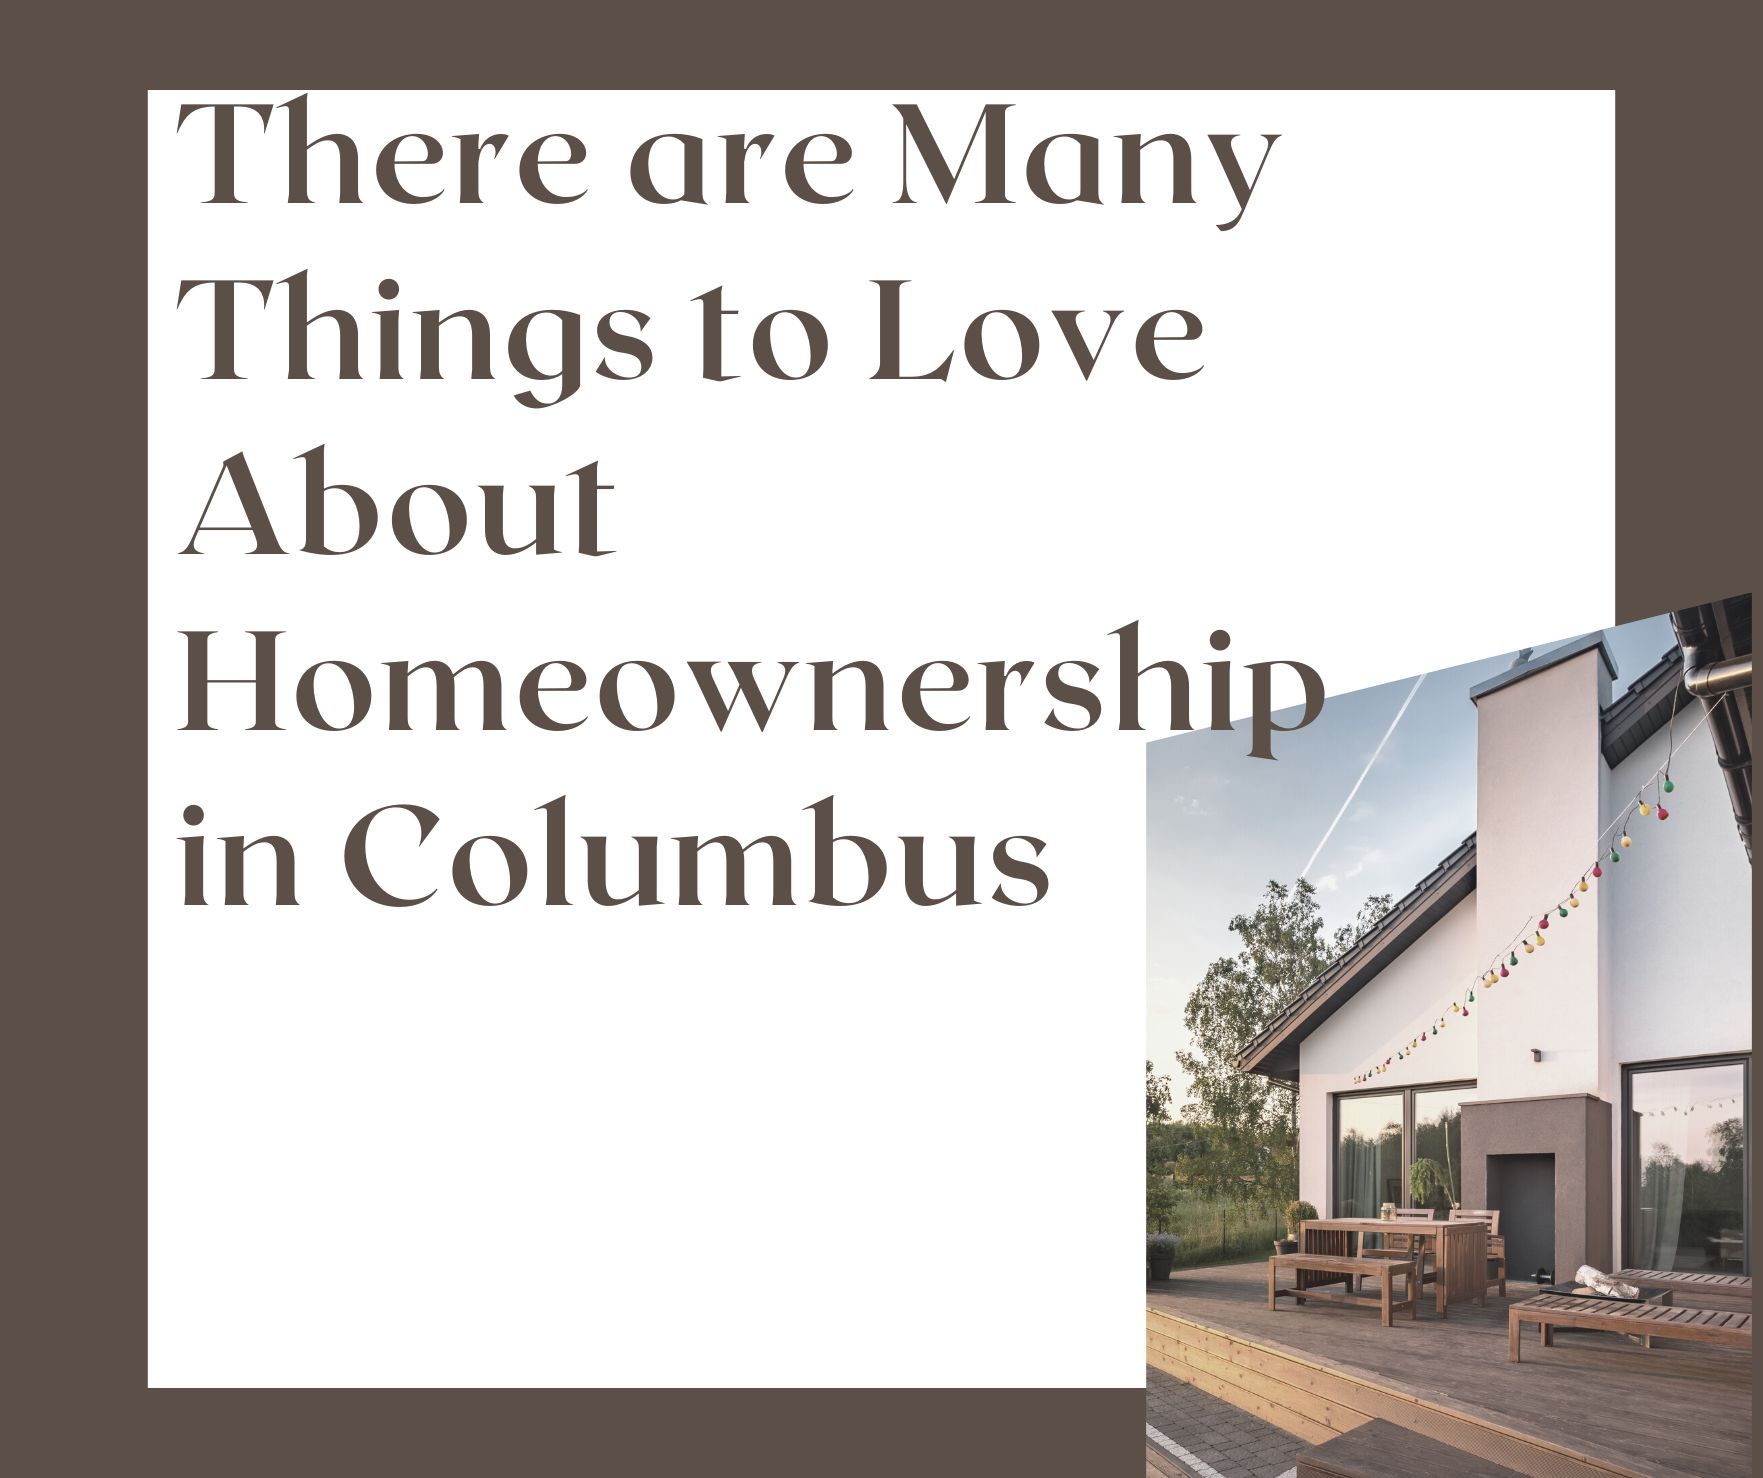 There are Many Things to Love About Homeownership in Columbus